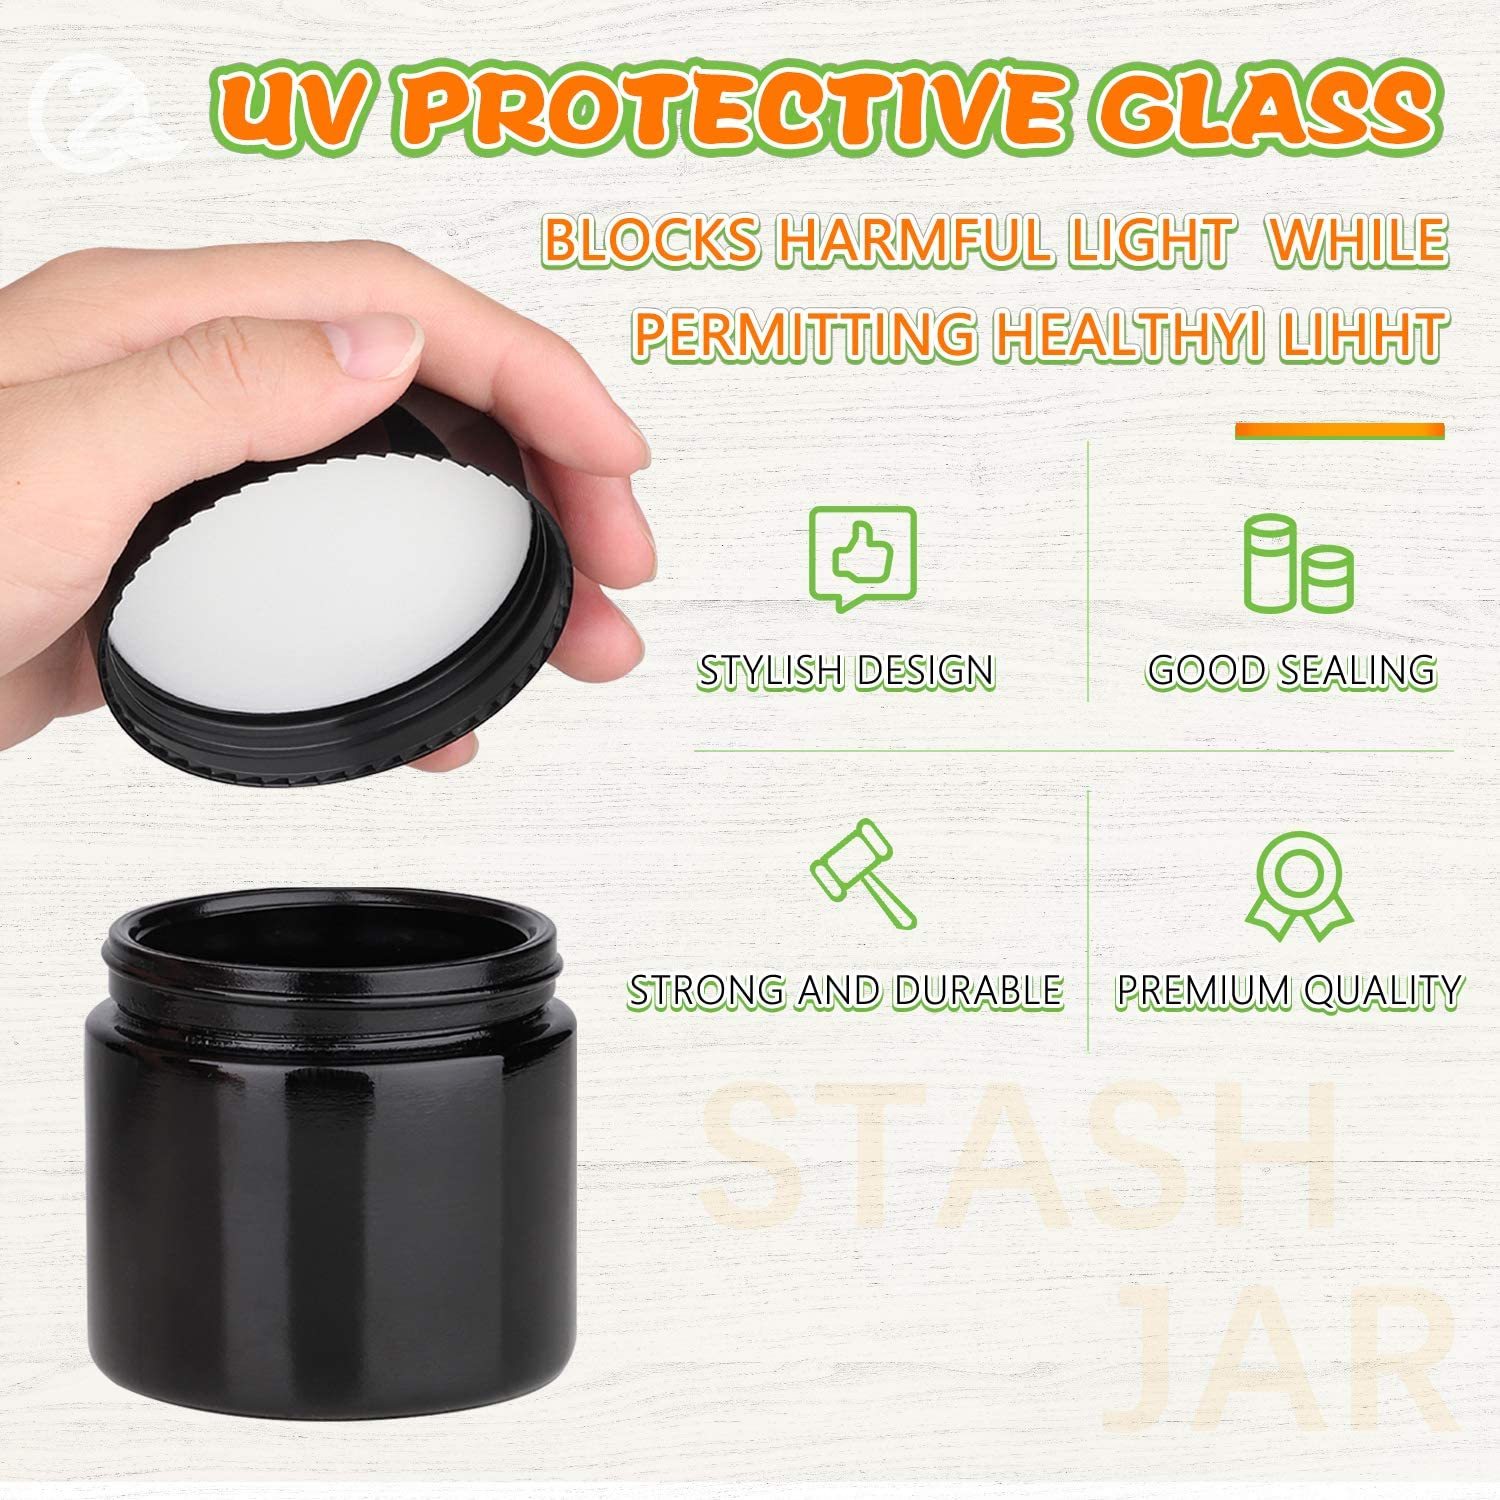 kitchentoolz Smell Proof Jar Glass Container With Airtight Metal